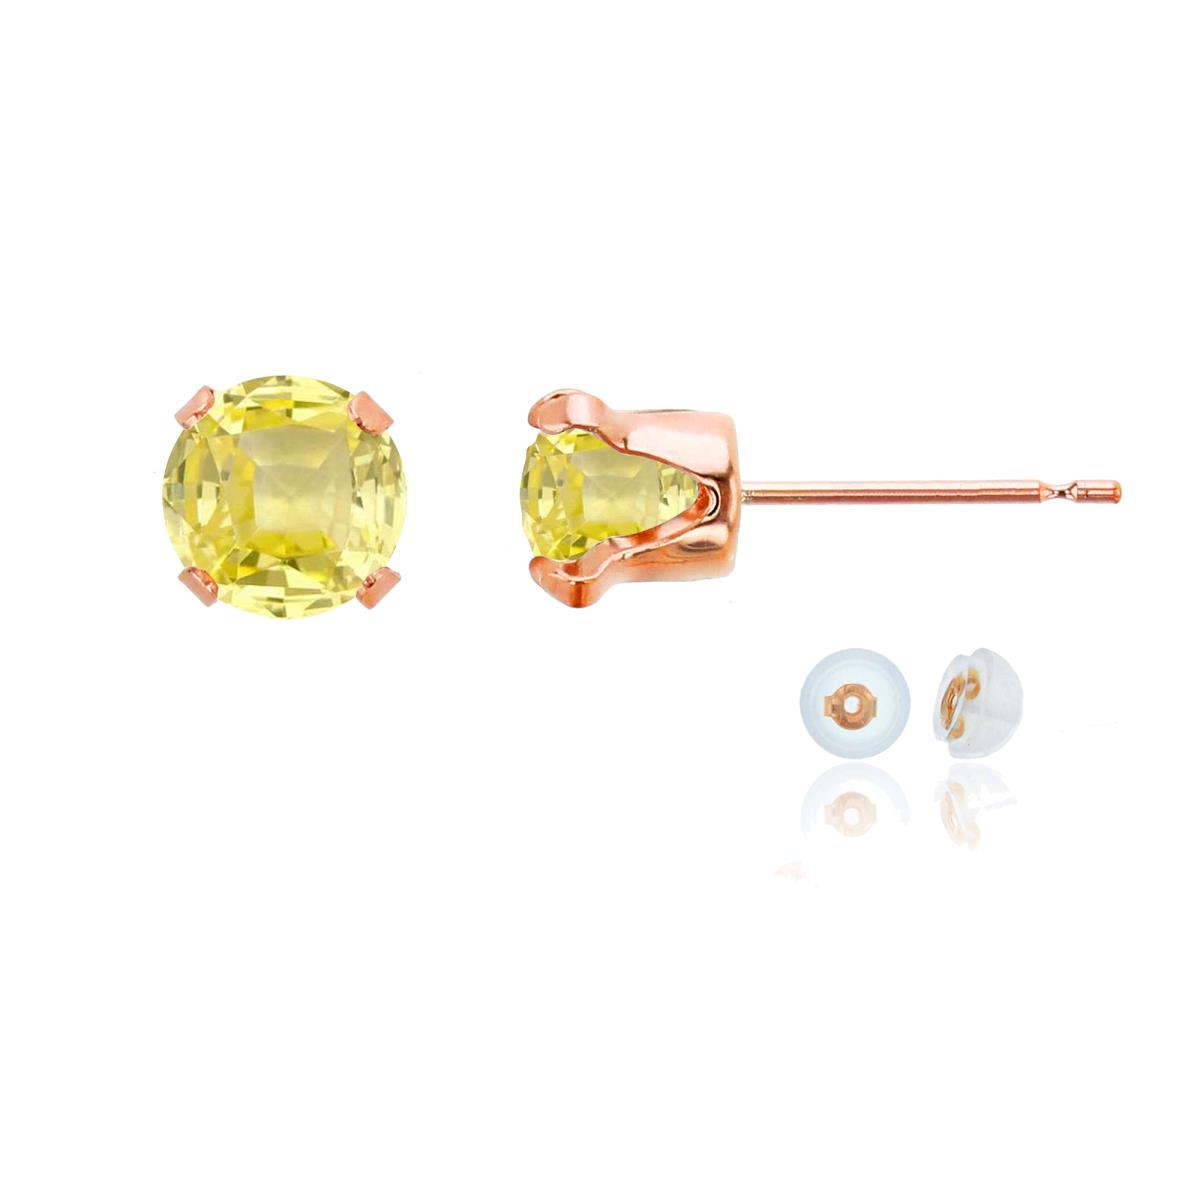 10K Rose Gold 6mm Round Cr Yellow Sapphire Stud Earring with Silicone Back